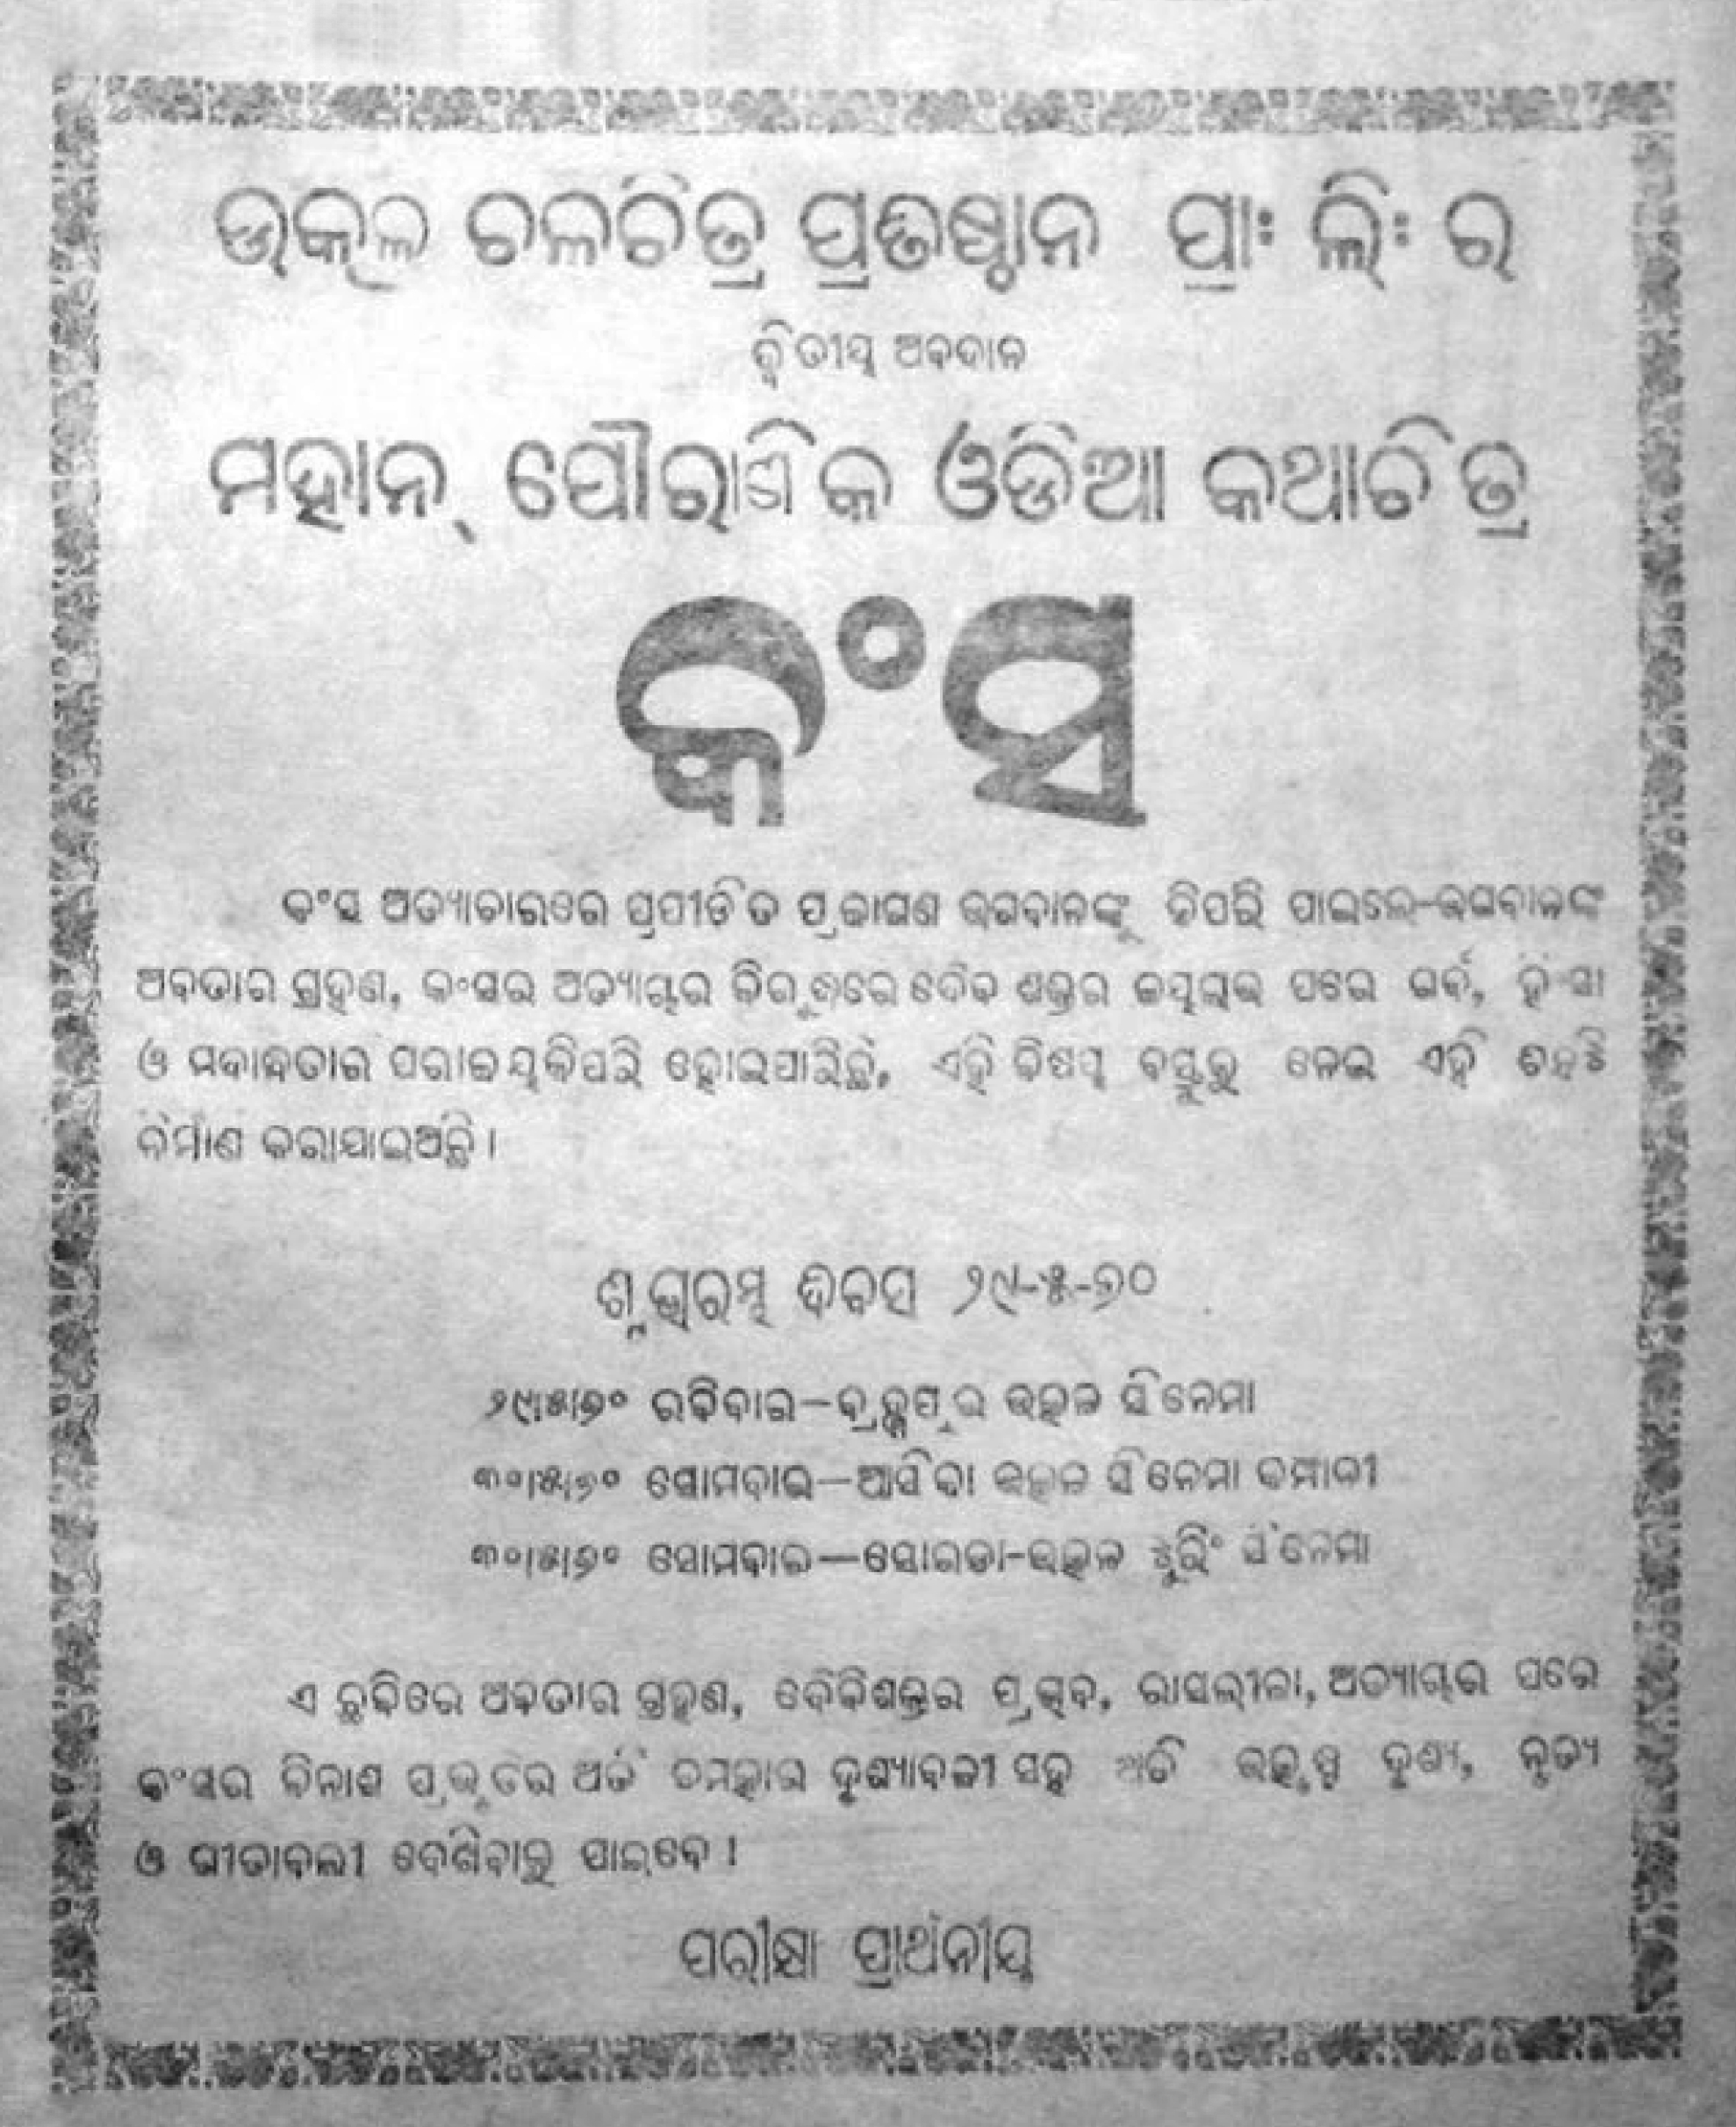 'Kansa' movie ad published in Nabeen weekly newspaper